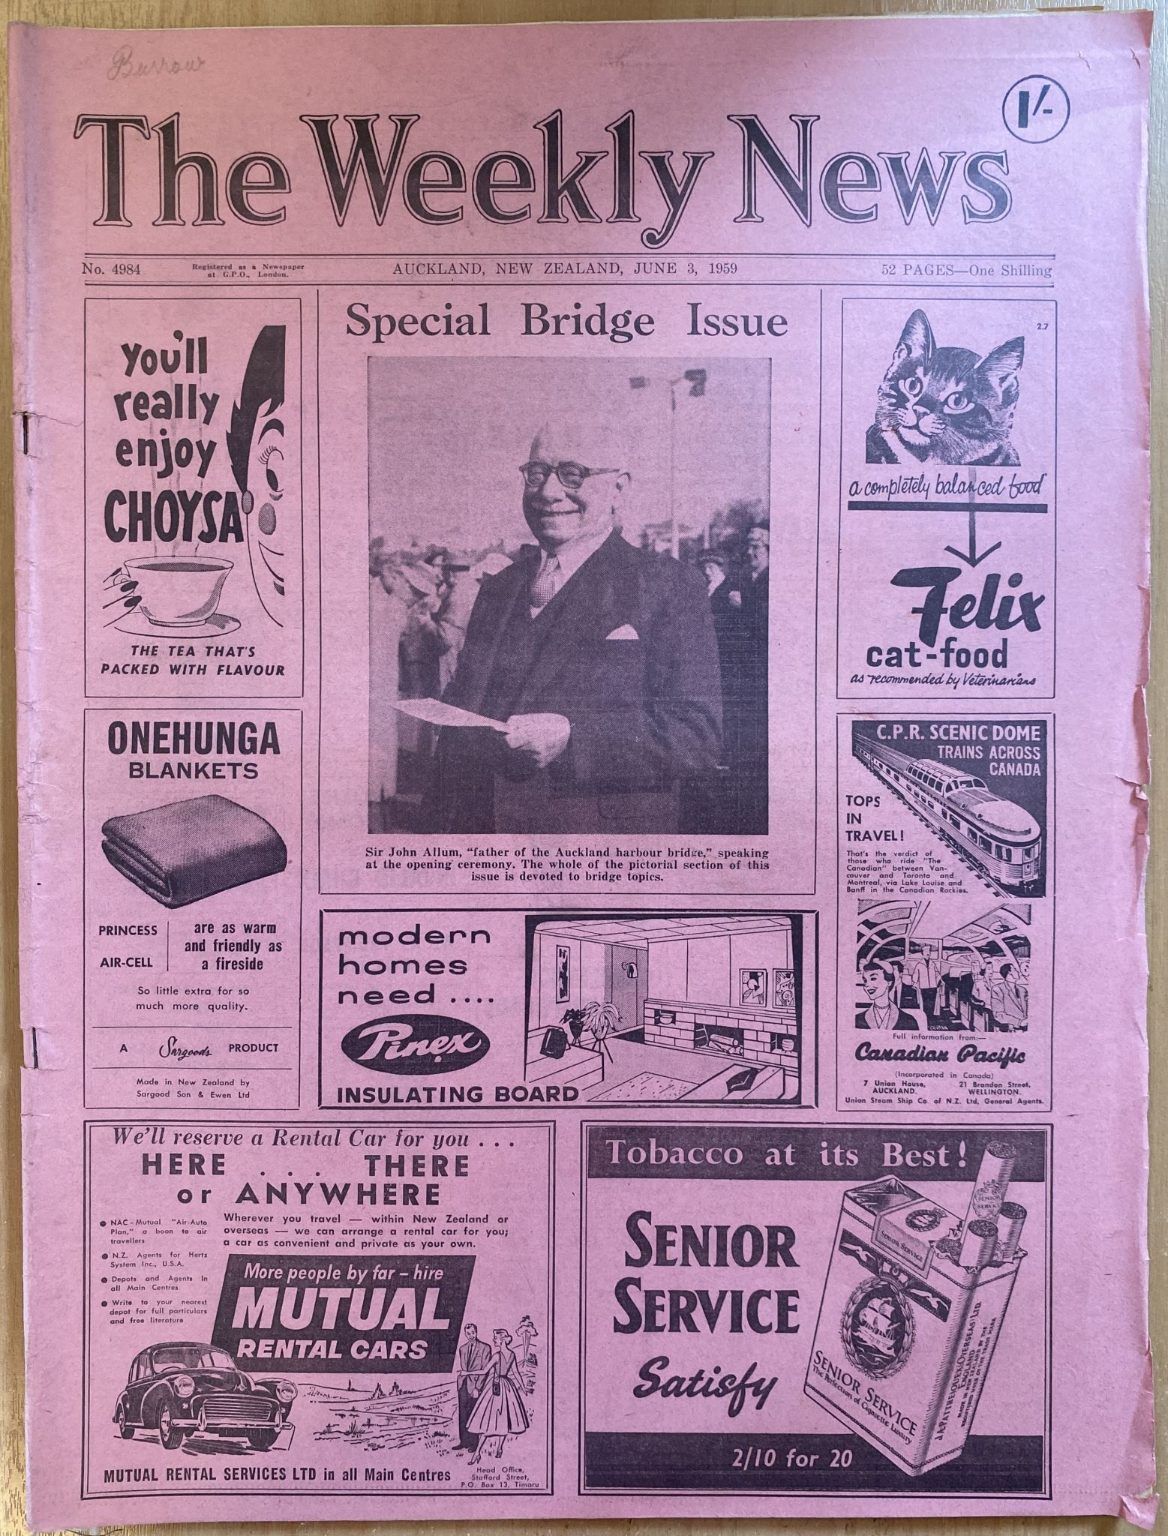 OLD NEWSPAPER: The Weekly News - No. 4984, 3 June 1959